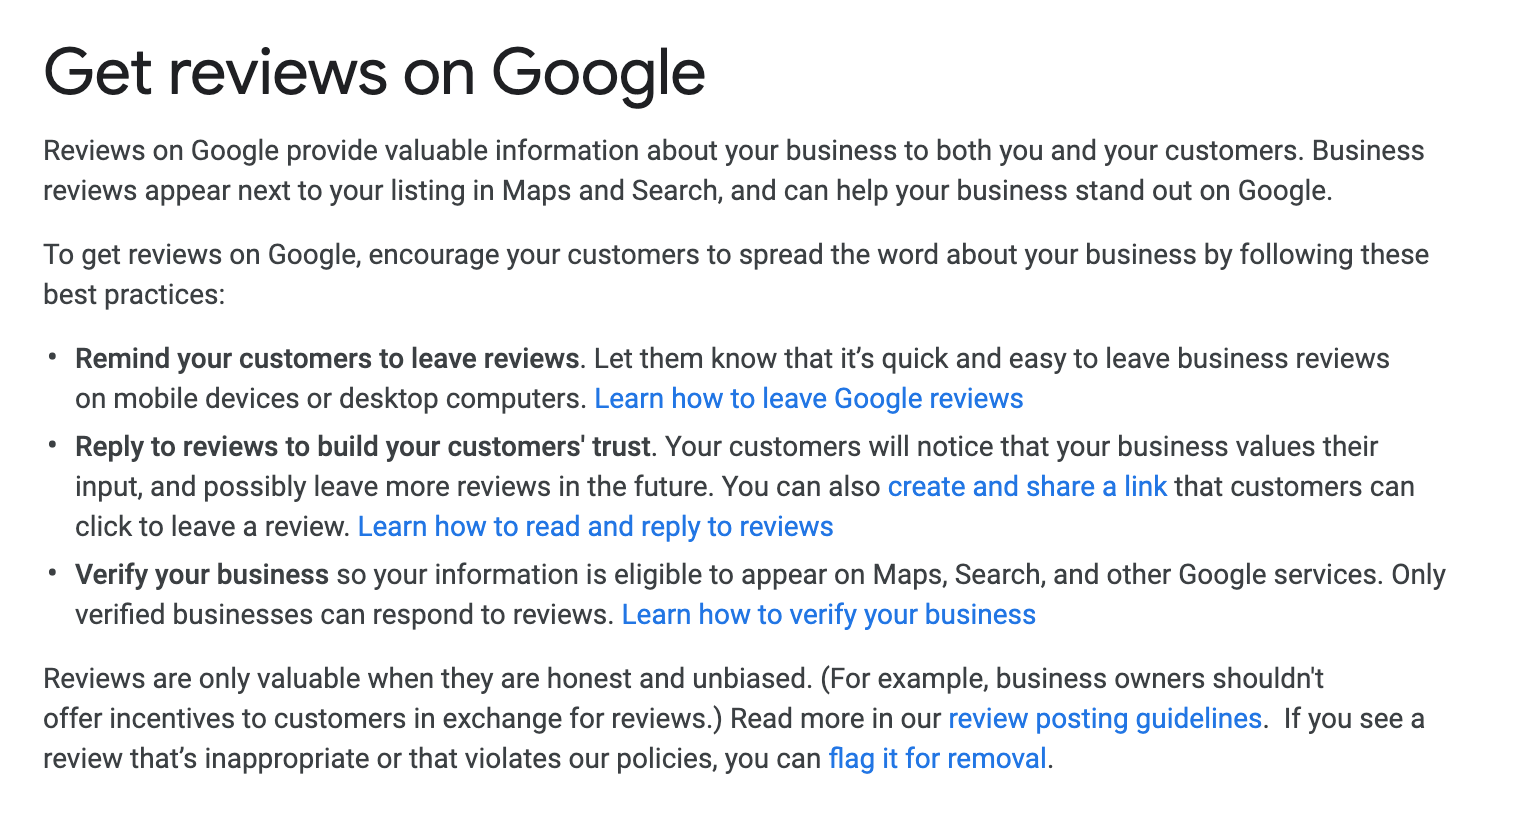 get reviews on google instructions